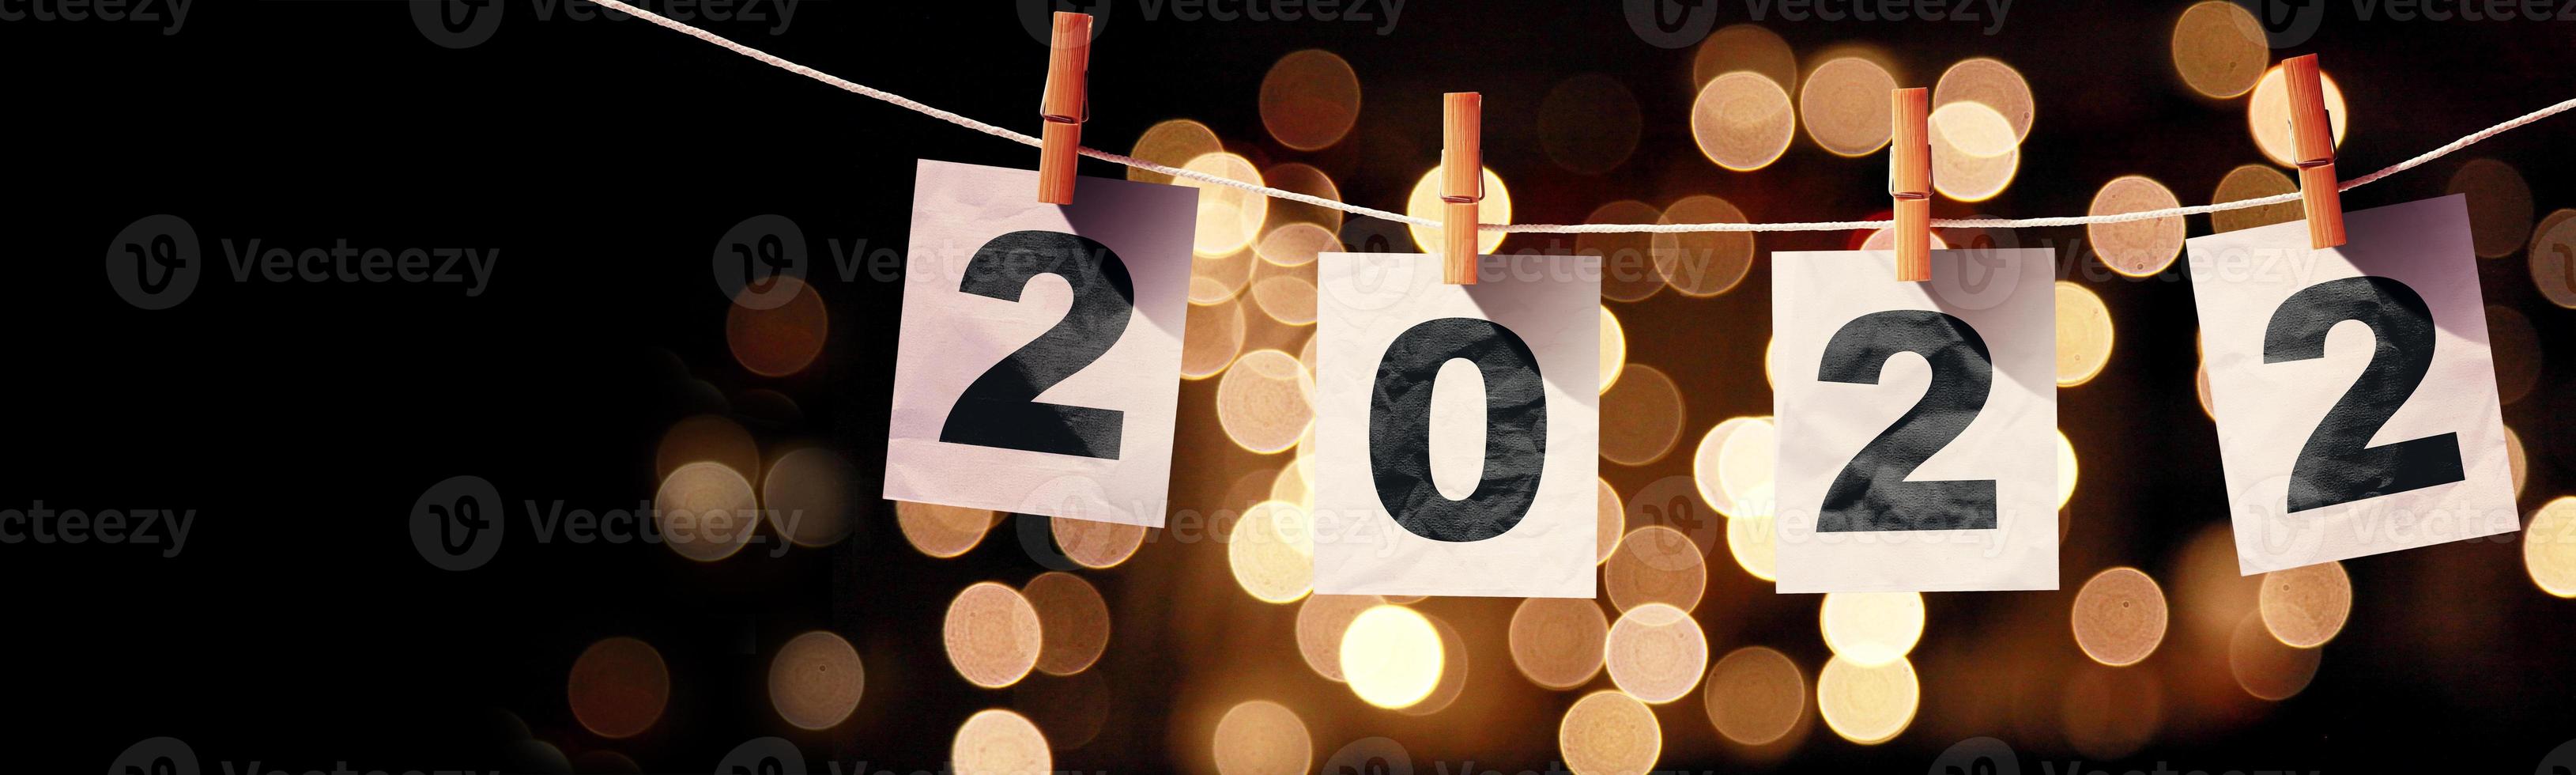 Happy New Year Background. Start to 2022. 3D illustration photo